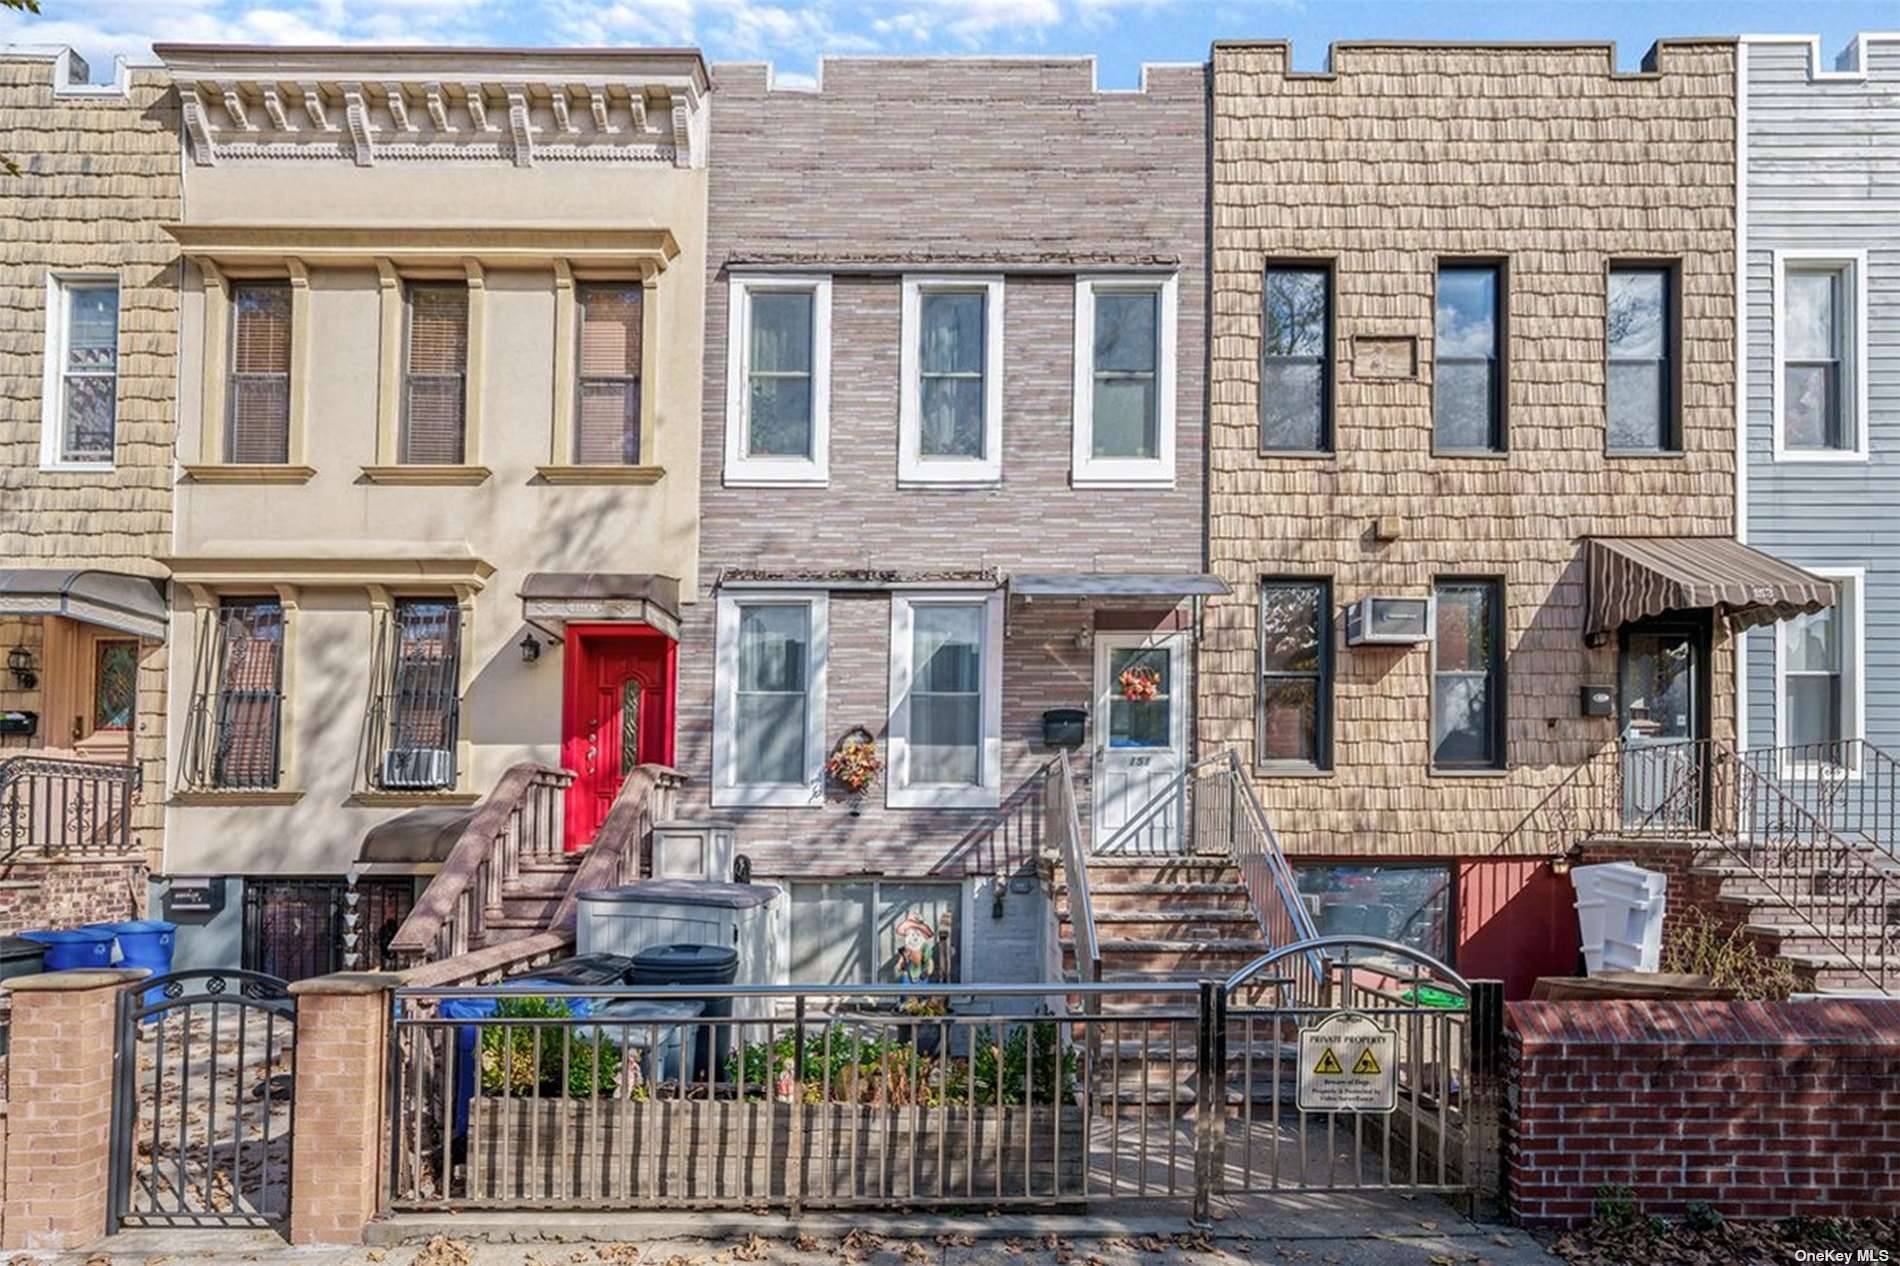 Welcome to your next home, where modern comfort meets classic charm in this beautifully renovated legal two family home located in the vibrant neighborhood of Greenwood Heights, Brooklyn.